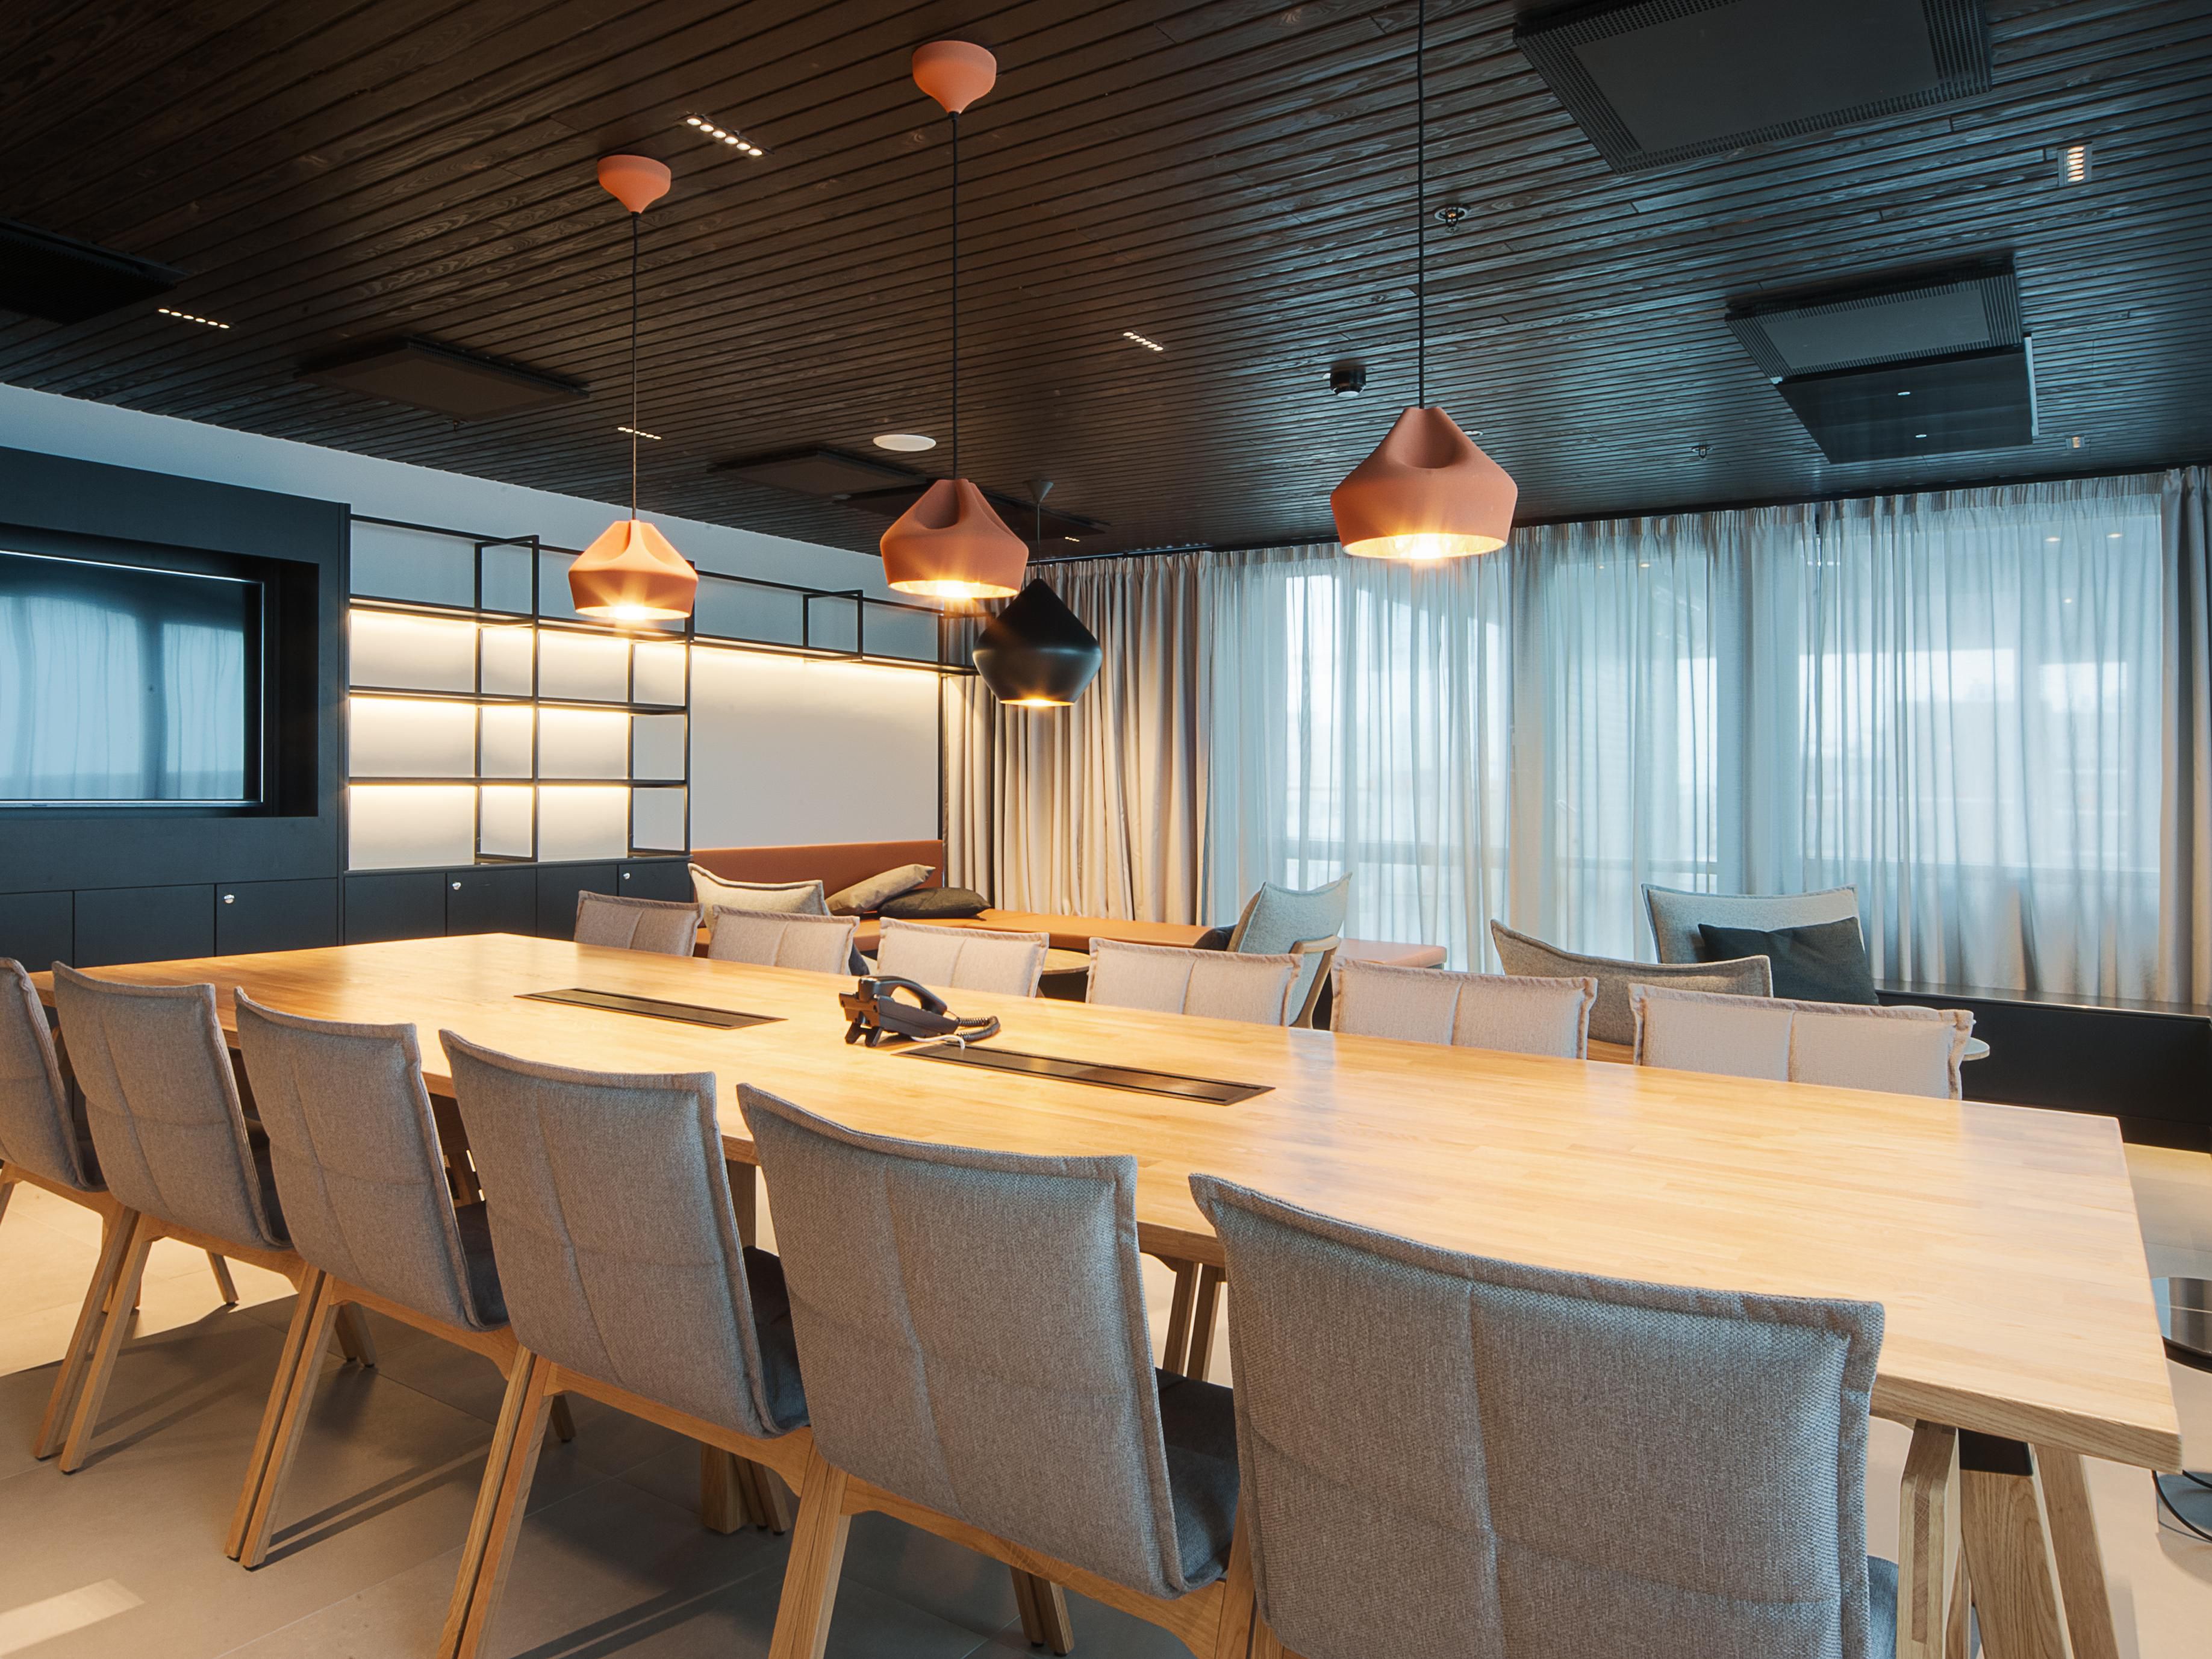 Need to hold a meeting up to 10 people or wish to arrange relaxing and fun event for up to 20 people? Book our elegant Terrace Cabinet in the 10th floor with private Finnish Sauna, covered Terrace and Jacuzzi.